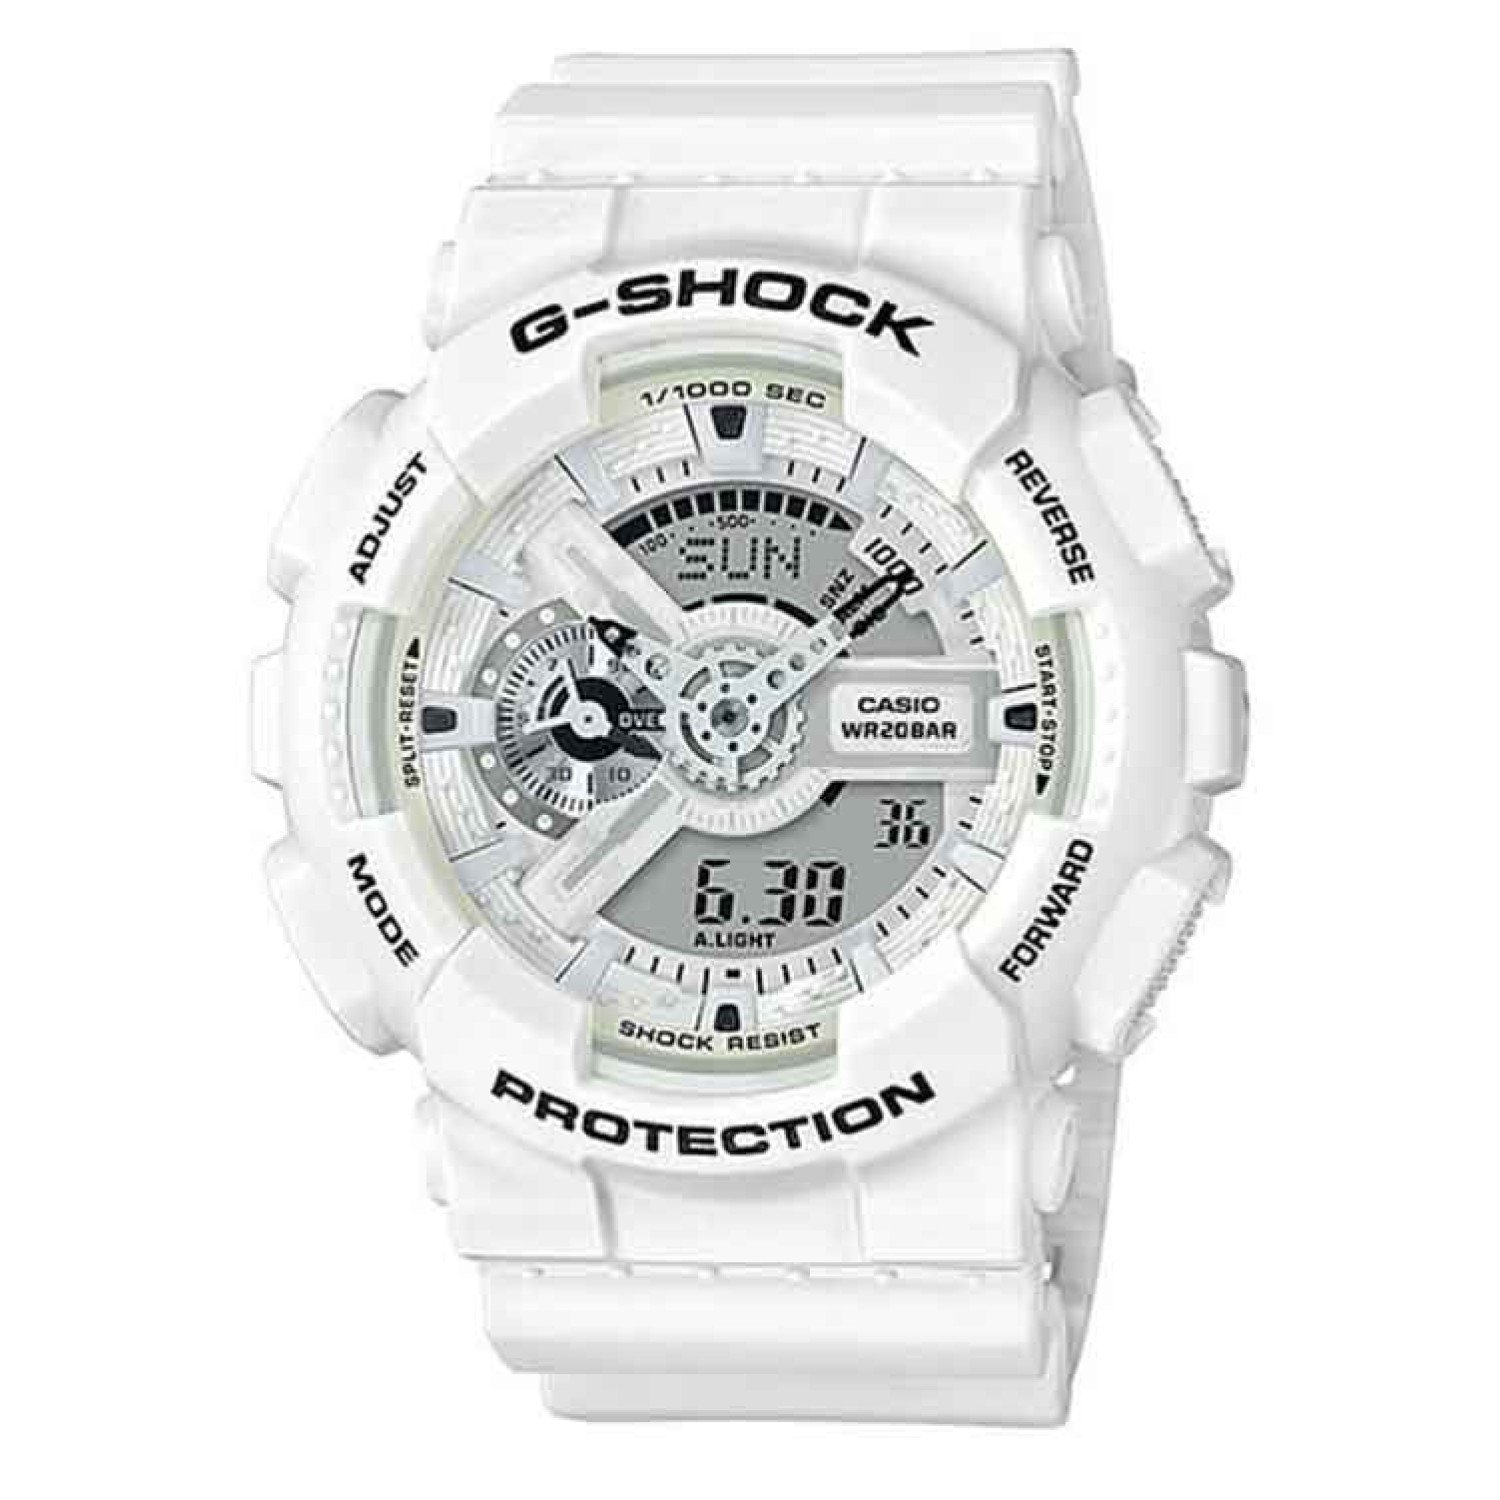 GA110MW-7A  G-Shock Marine White Series Watch. The GA-110MW-7A is a large-case analog-digital model with an industrial-style display Afterpay - Split your purchase into 4 instalments - Pay for your purchase over 4 instalments, due every two weeks. G-shock